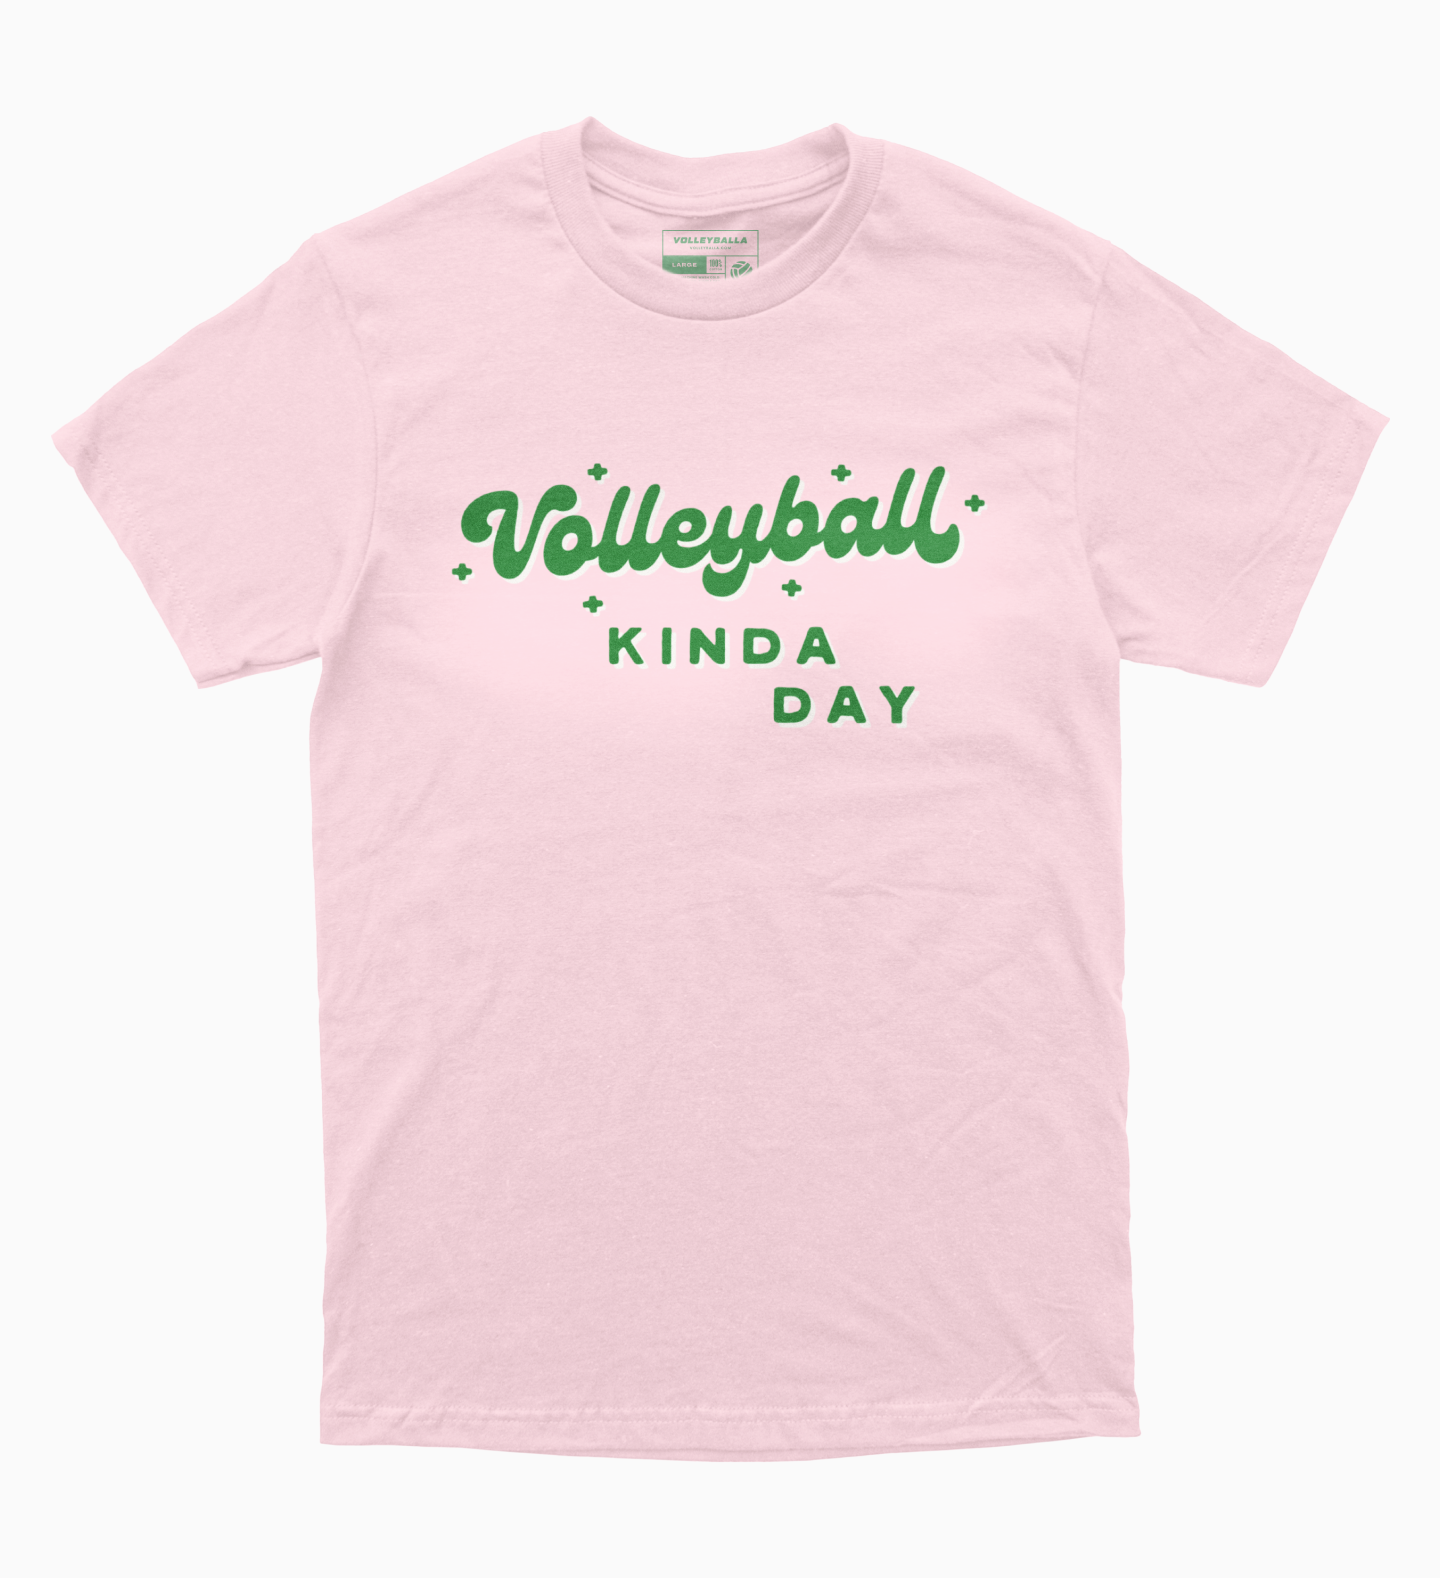 Volleyball Kinda Day - Volleyball T-Shirt